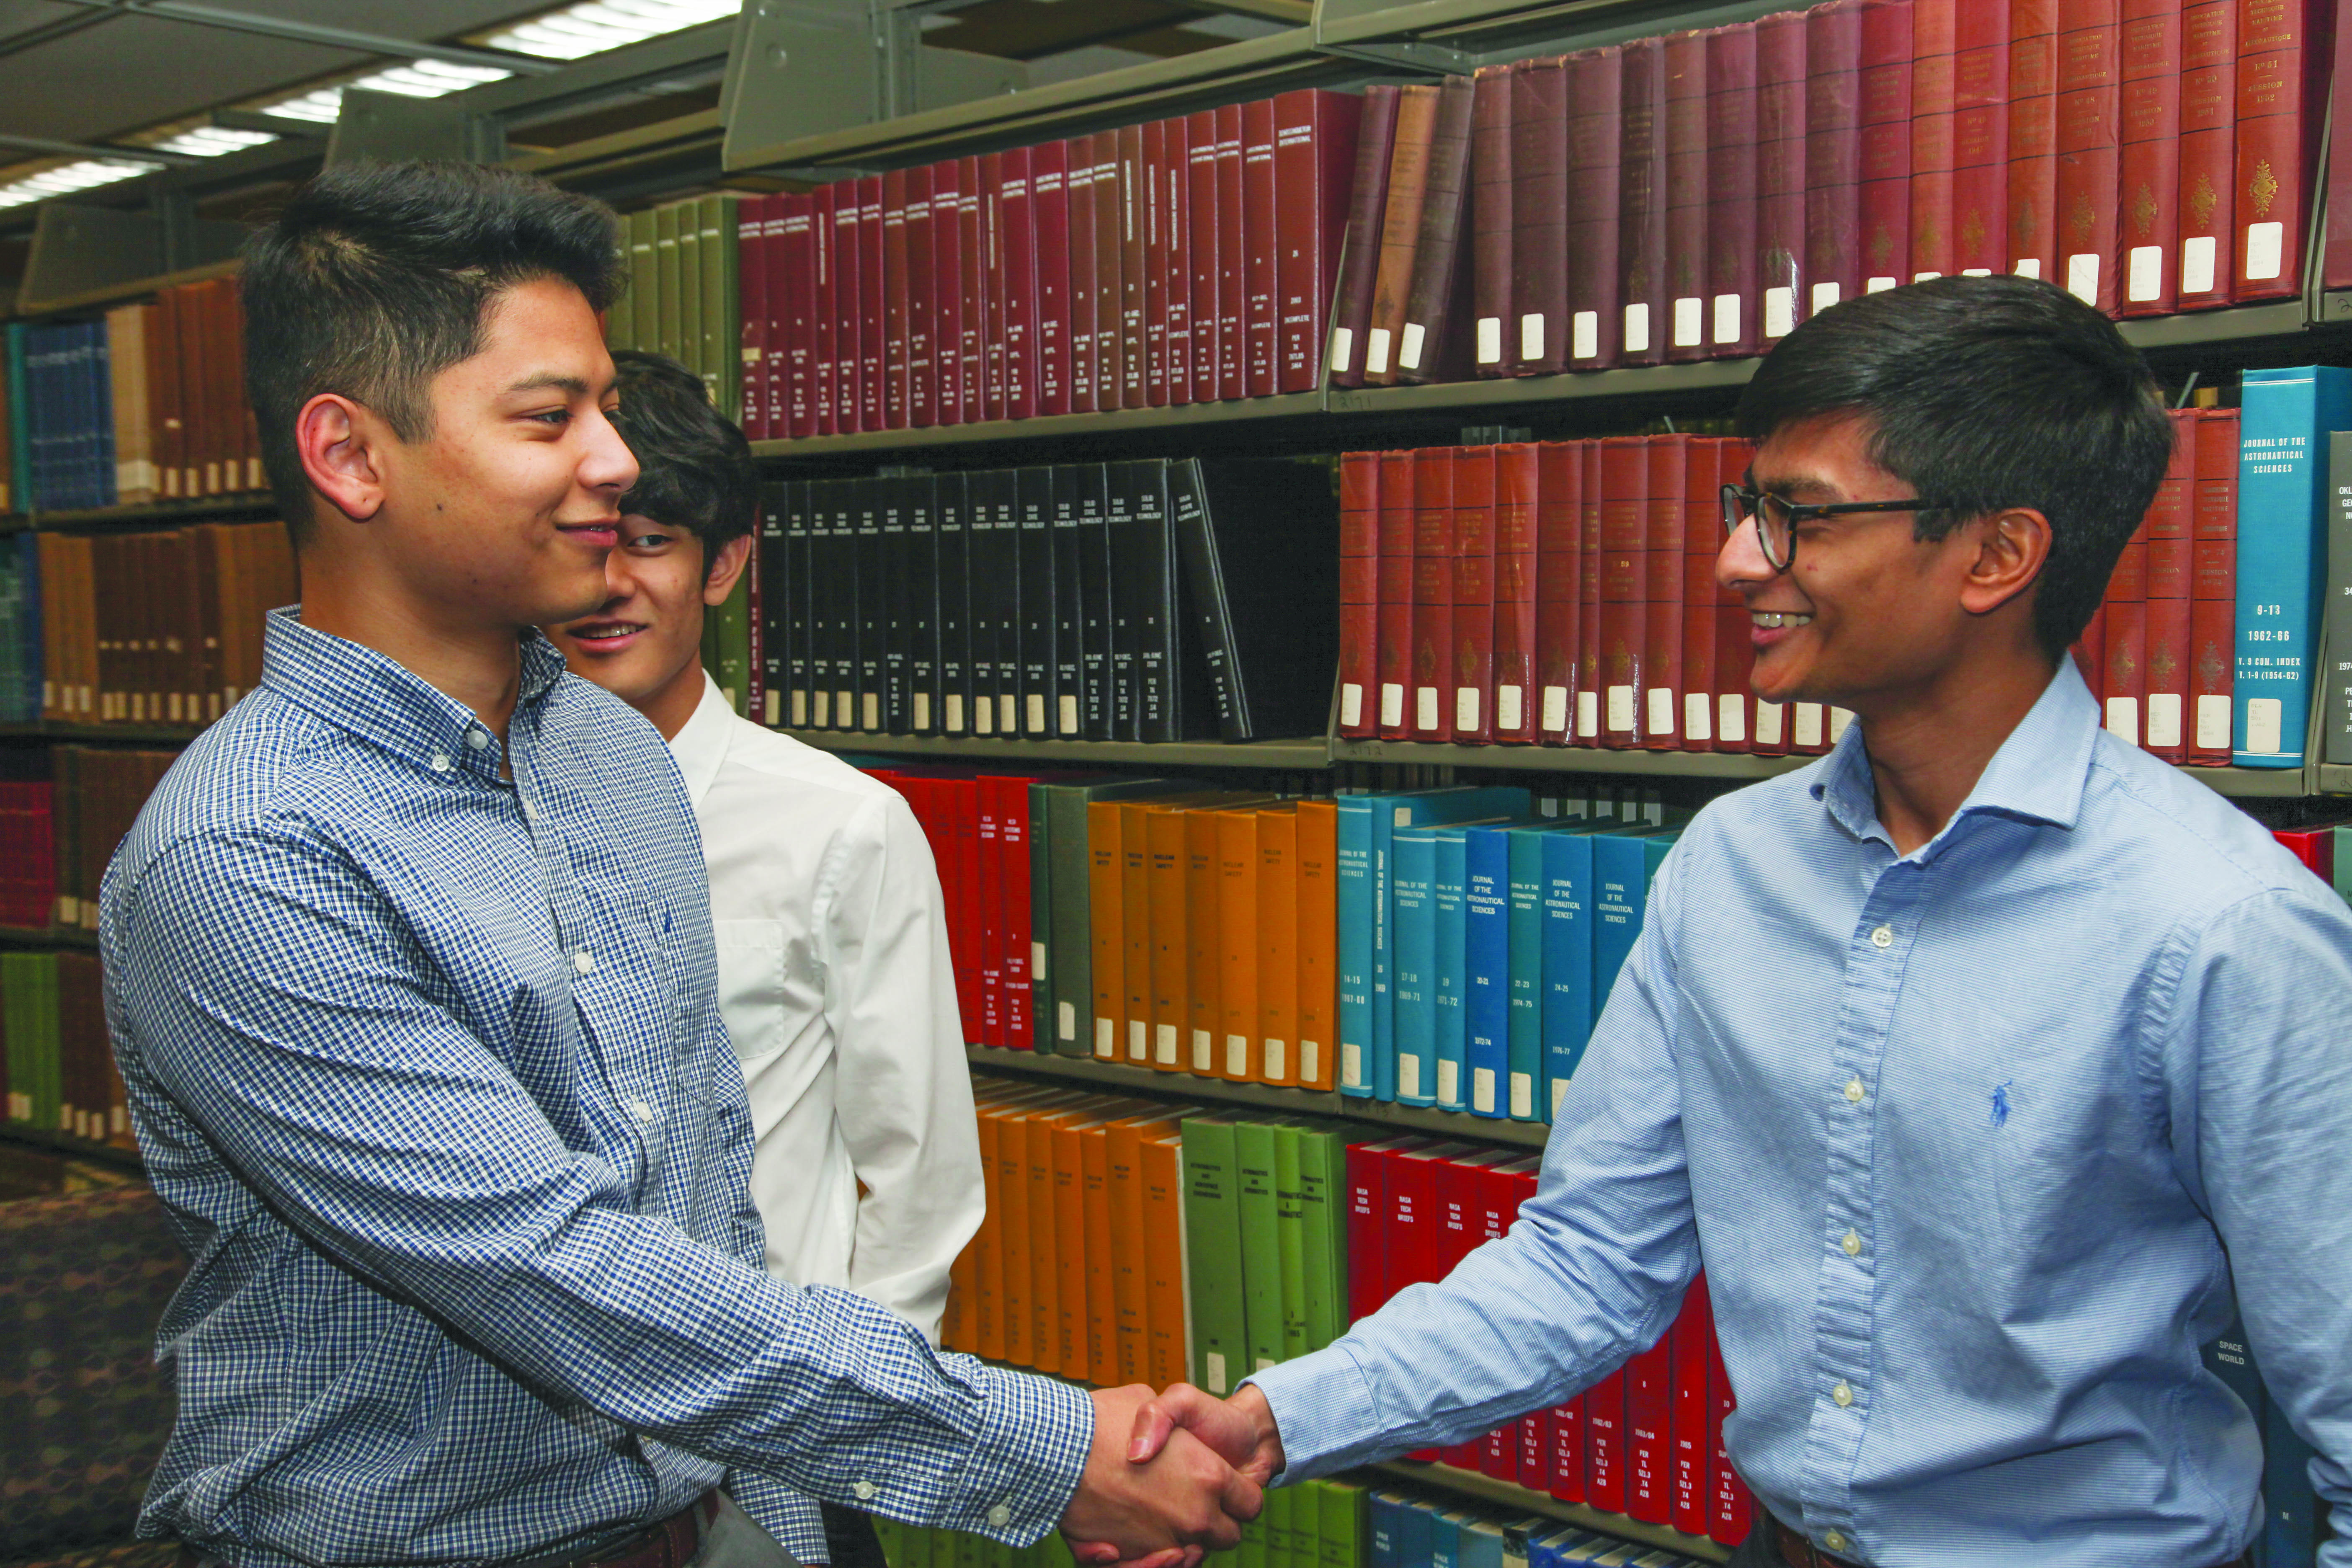 Students provide free consulting services